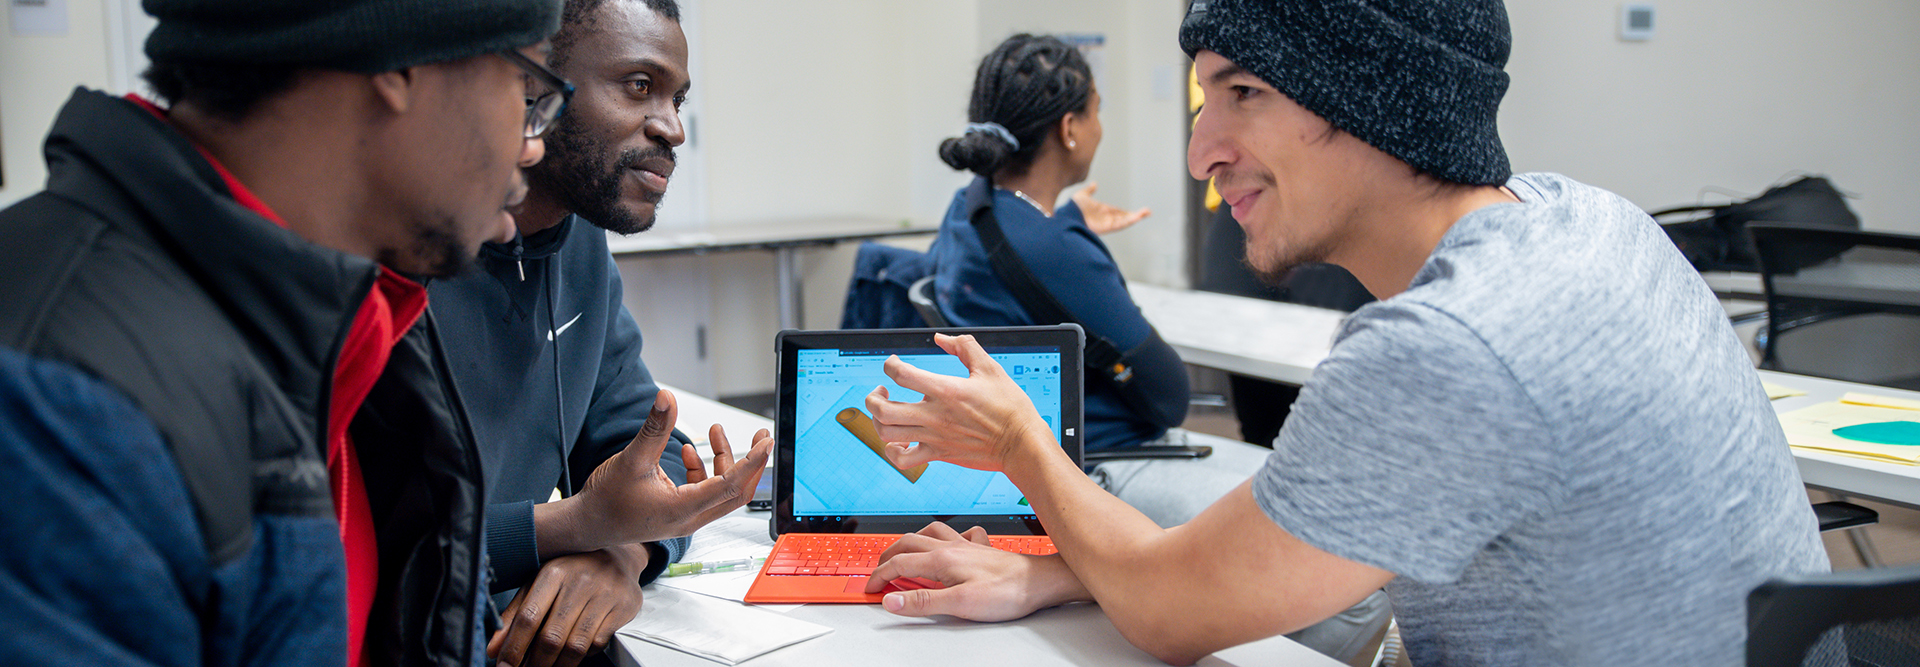 Students looking at one laptop screen, smiling, and talking